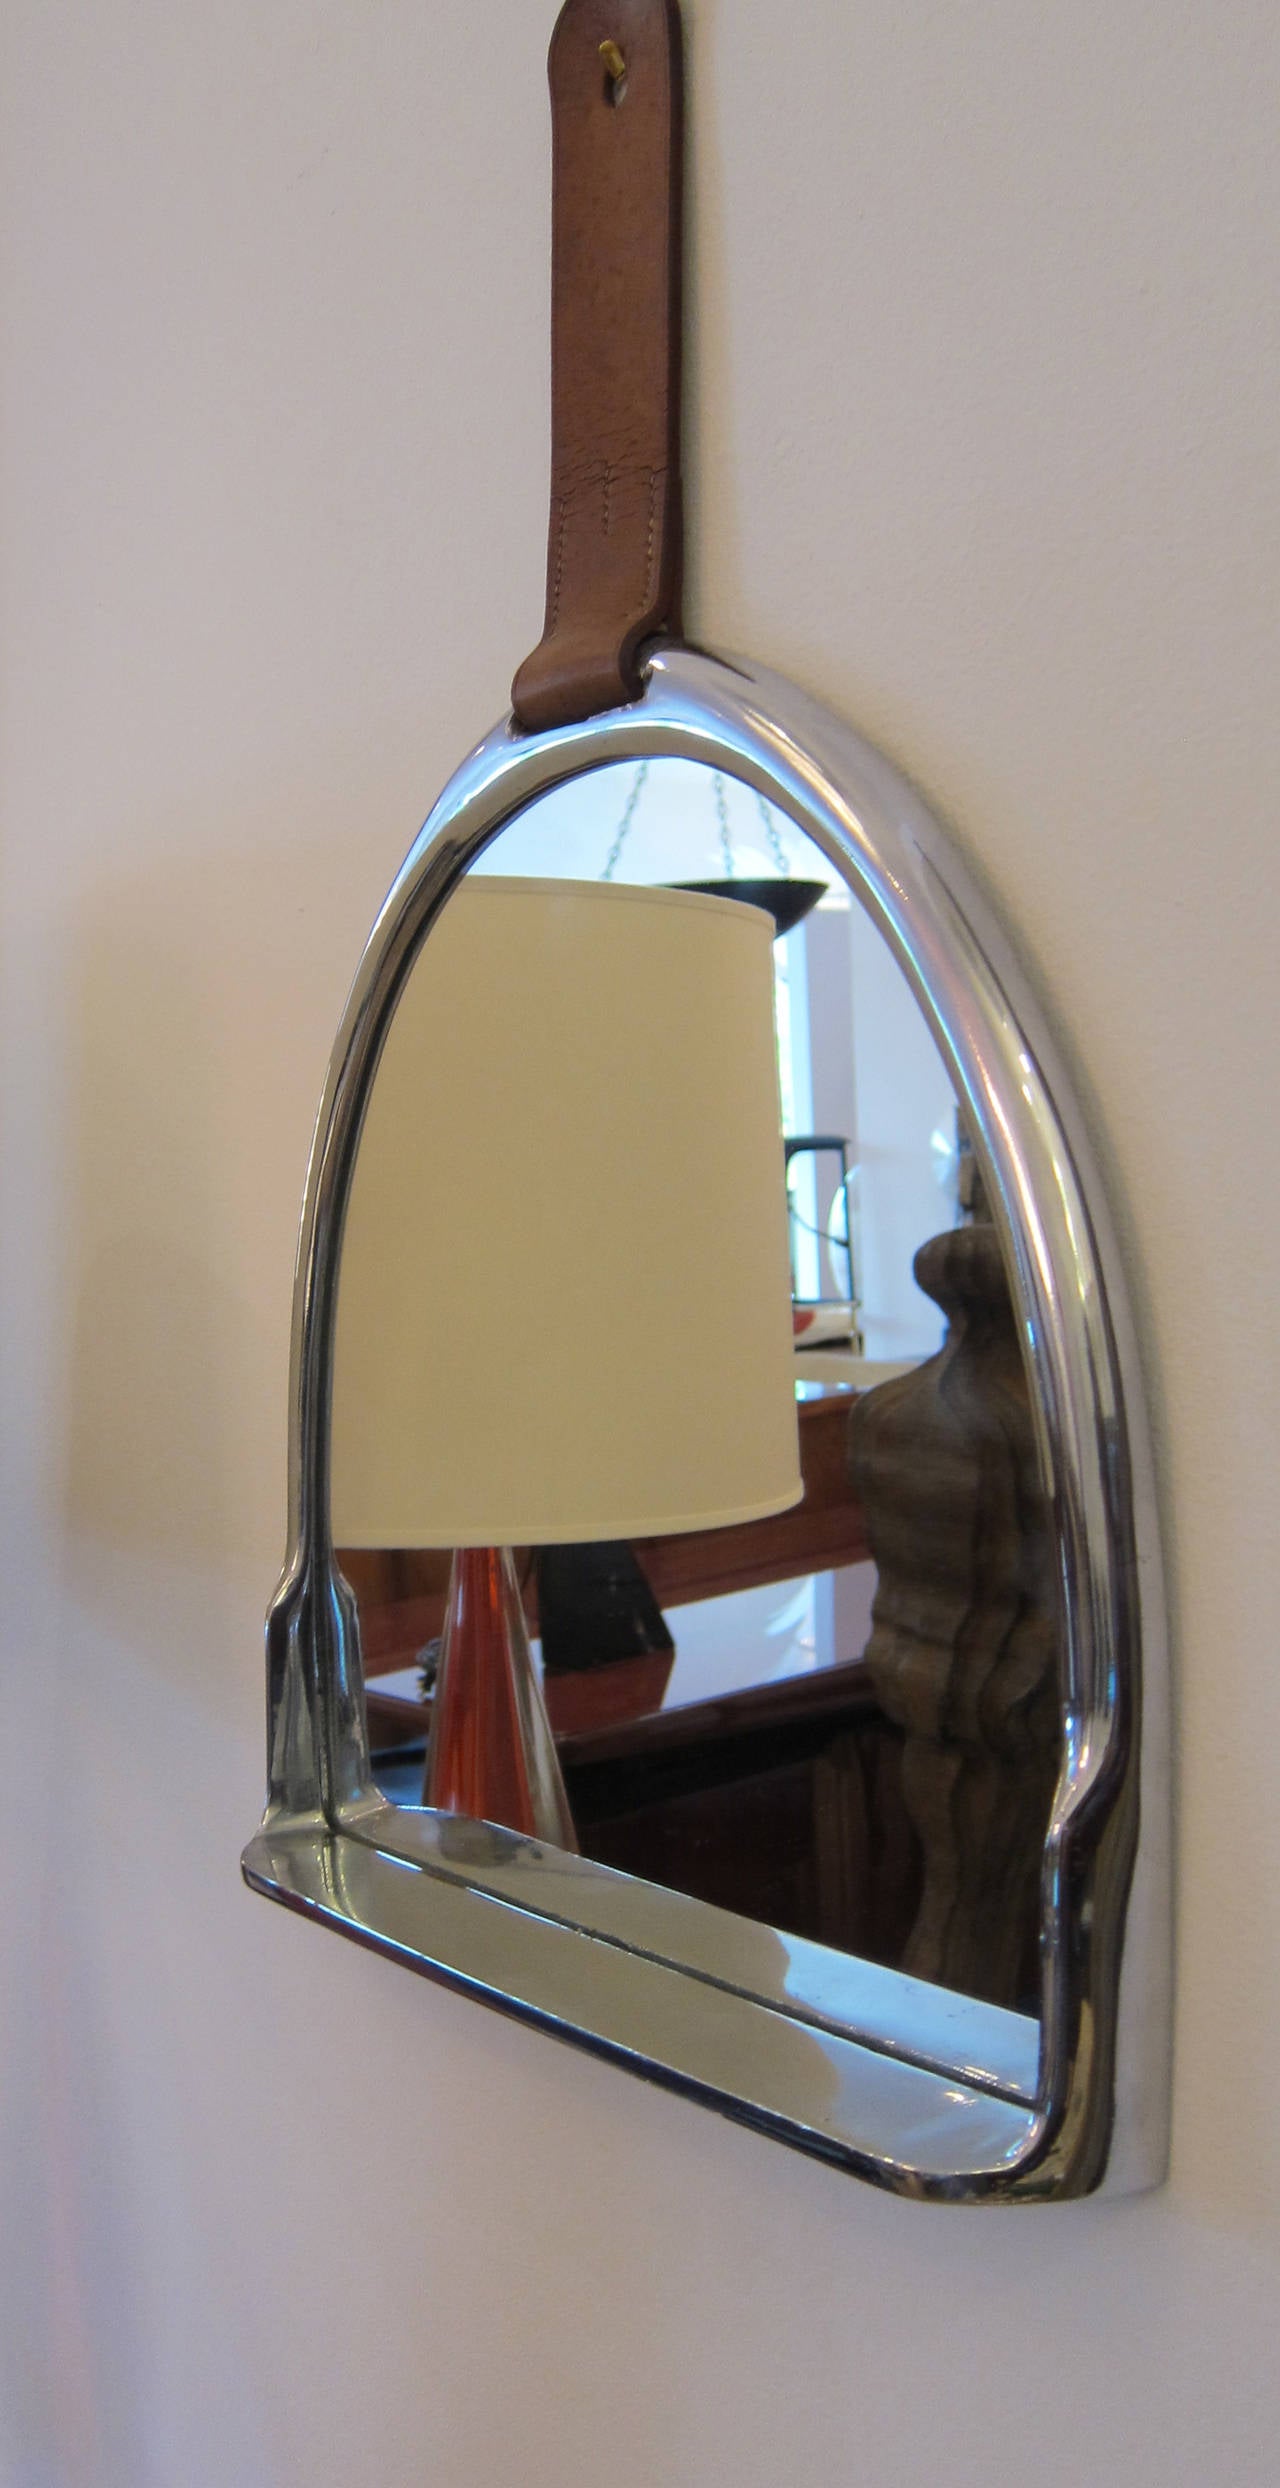 Chic chrome-plated stirrup shaped mirror with shelf and tobacco stitched leather strap, in the manner of Hermes or Gucci, unmarked.